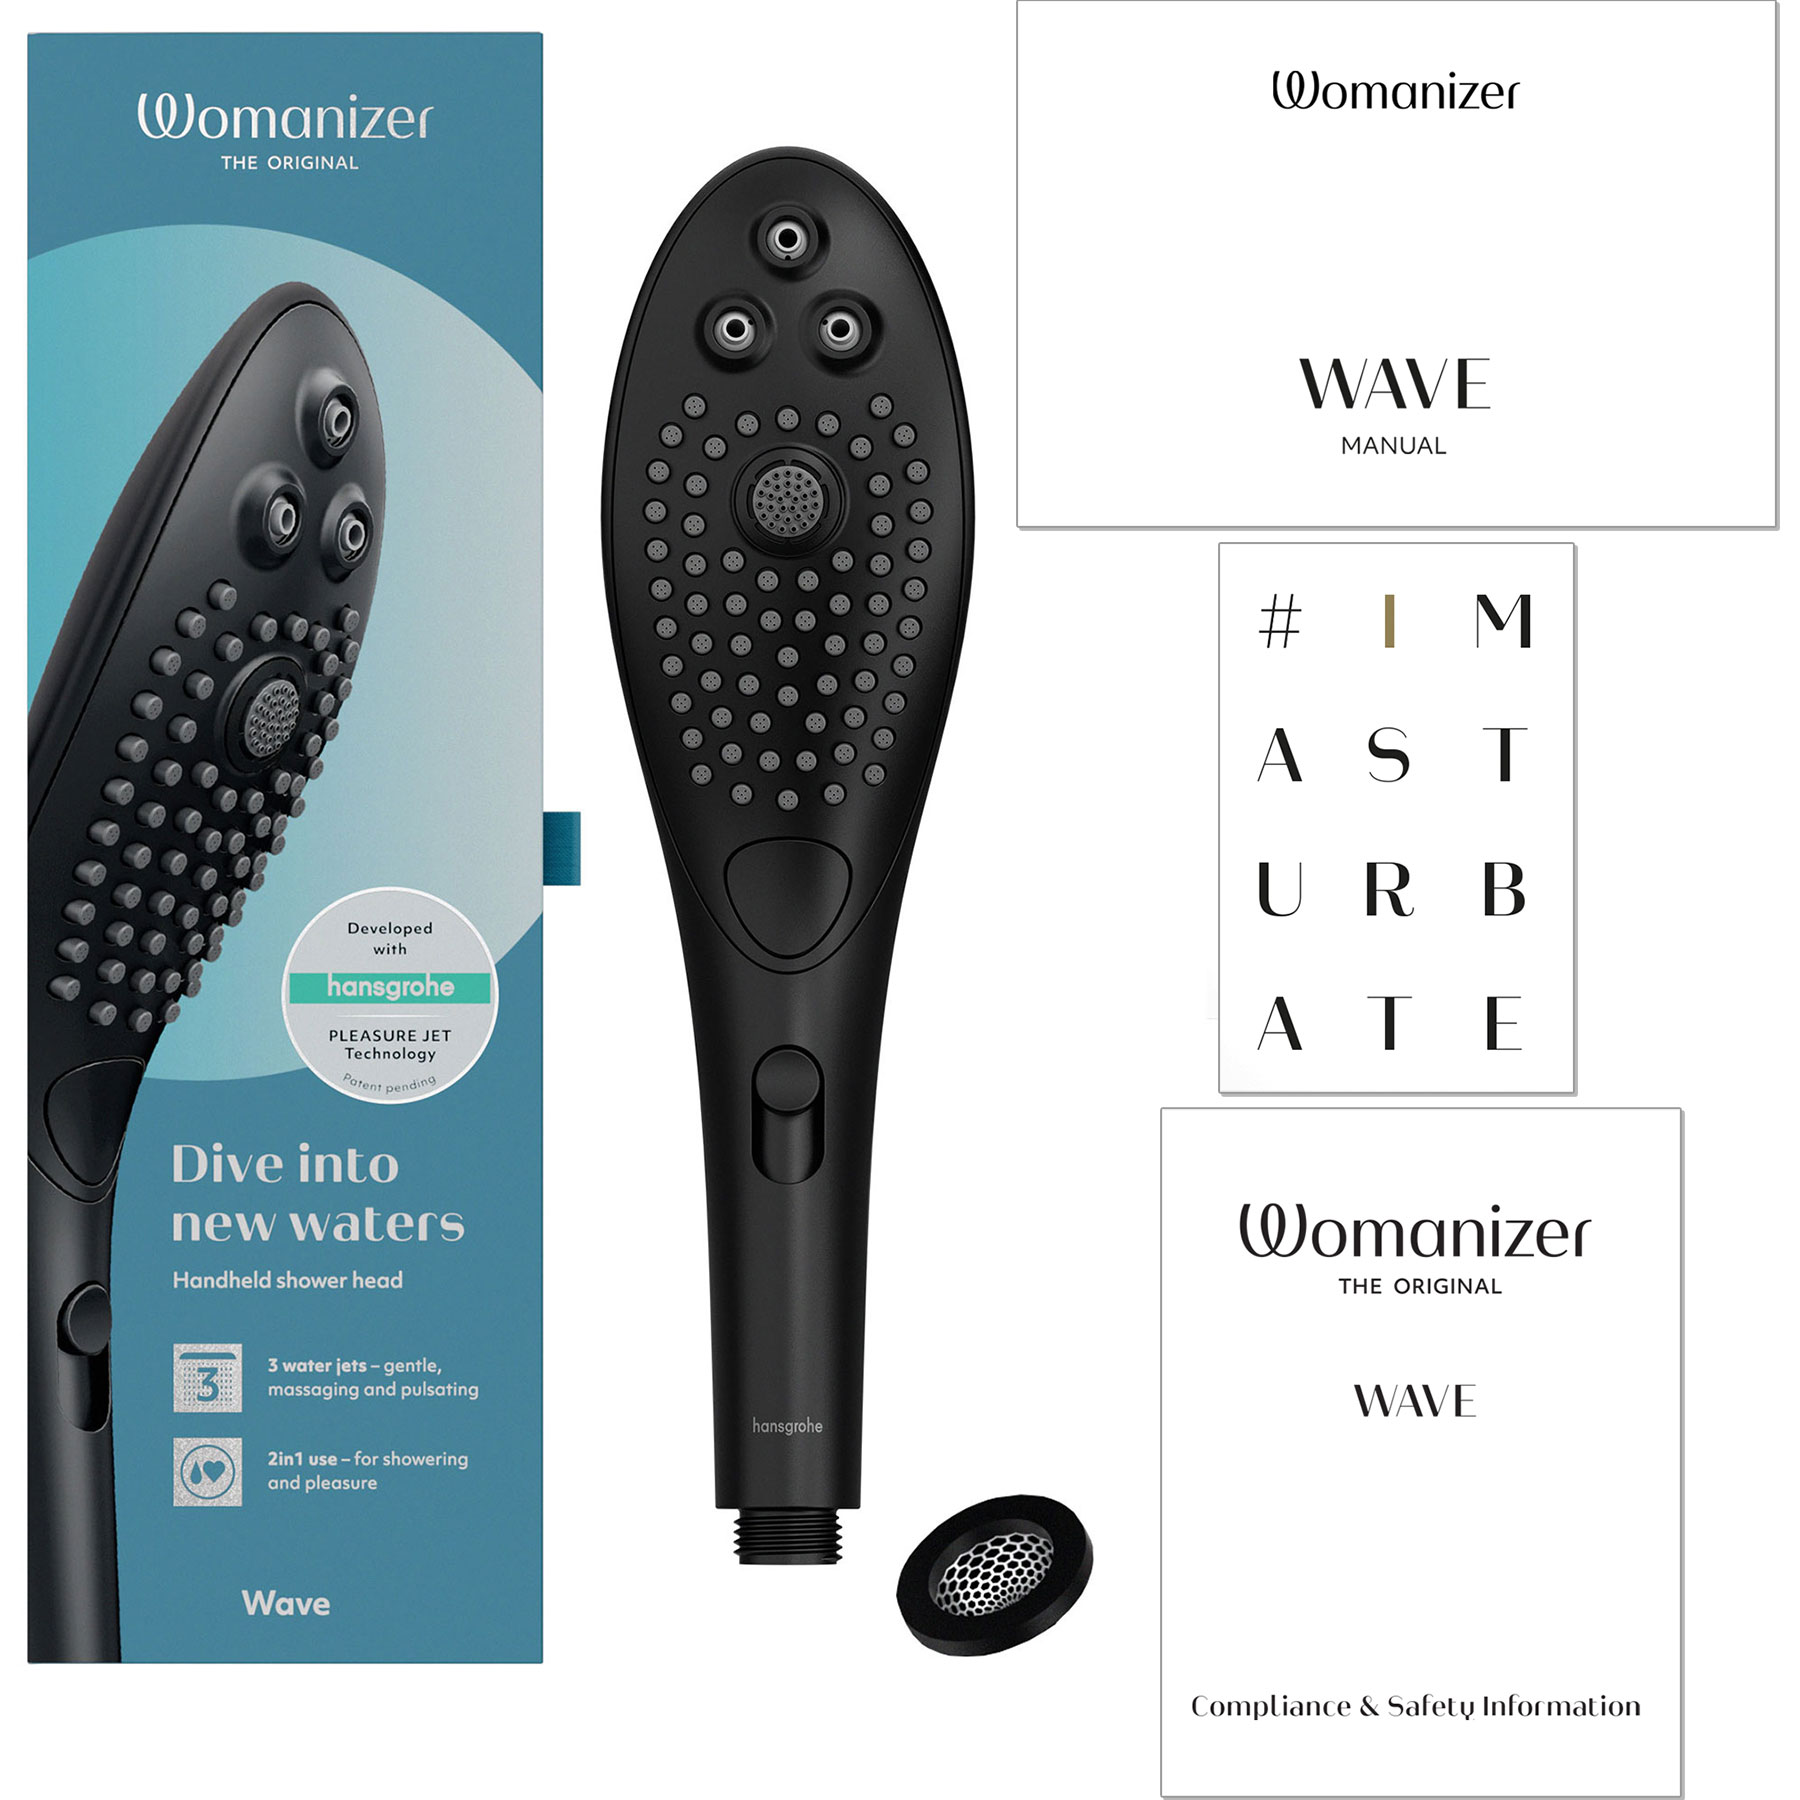 Womanizer Wave - What's In The Box Graphic